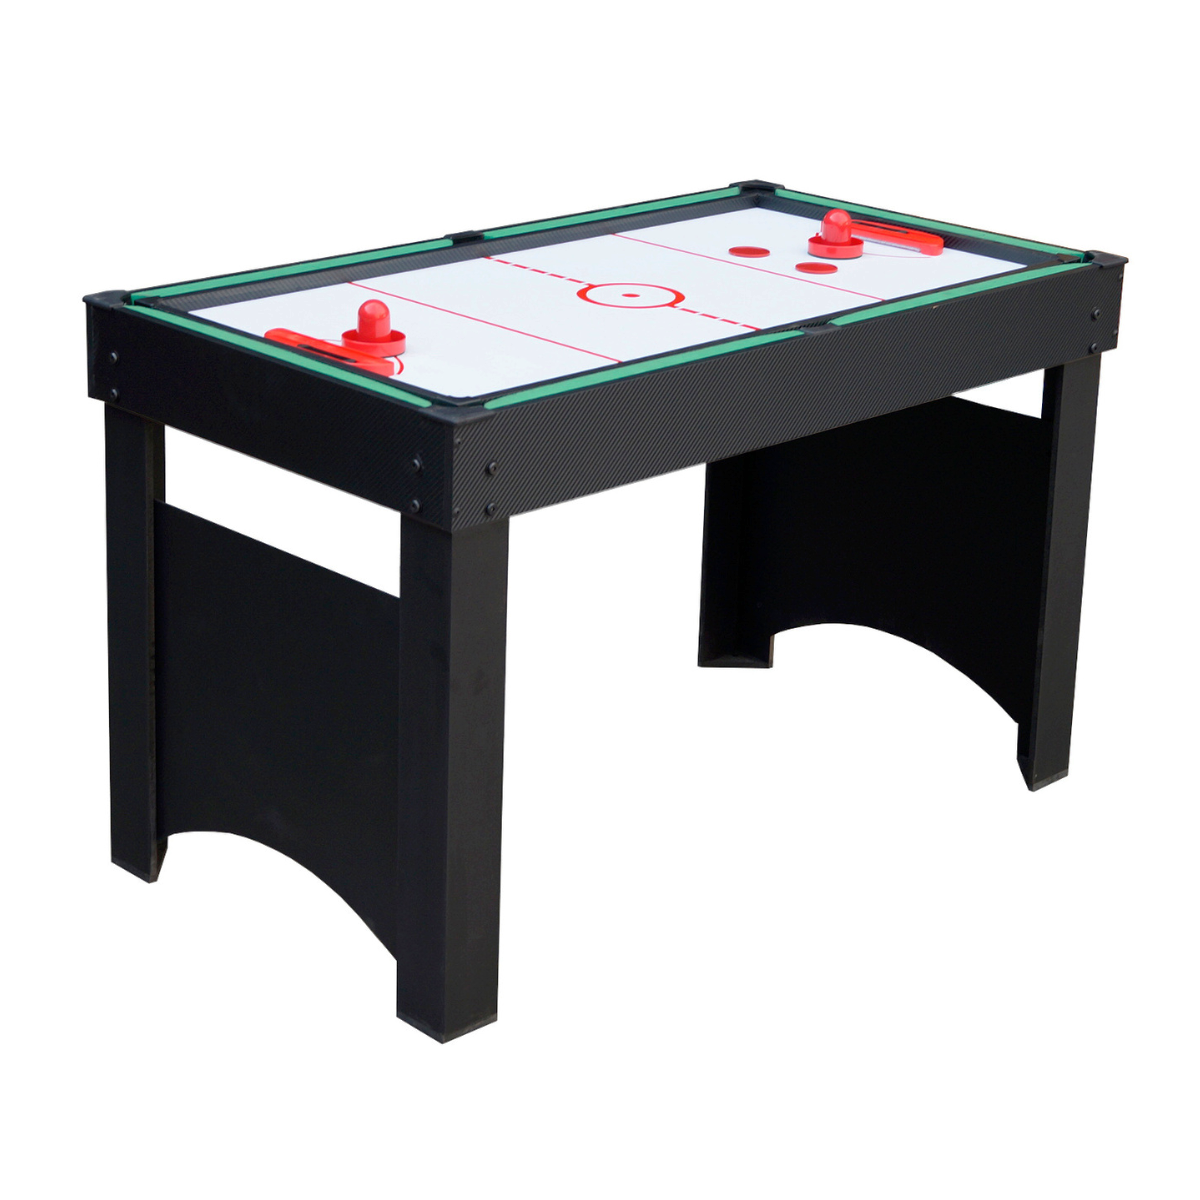 The Jupiter 4ft 4-in-1 Pool Table